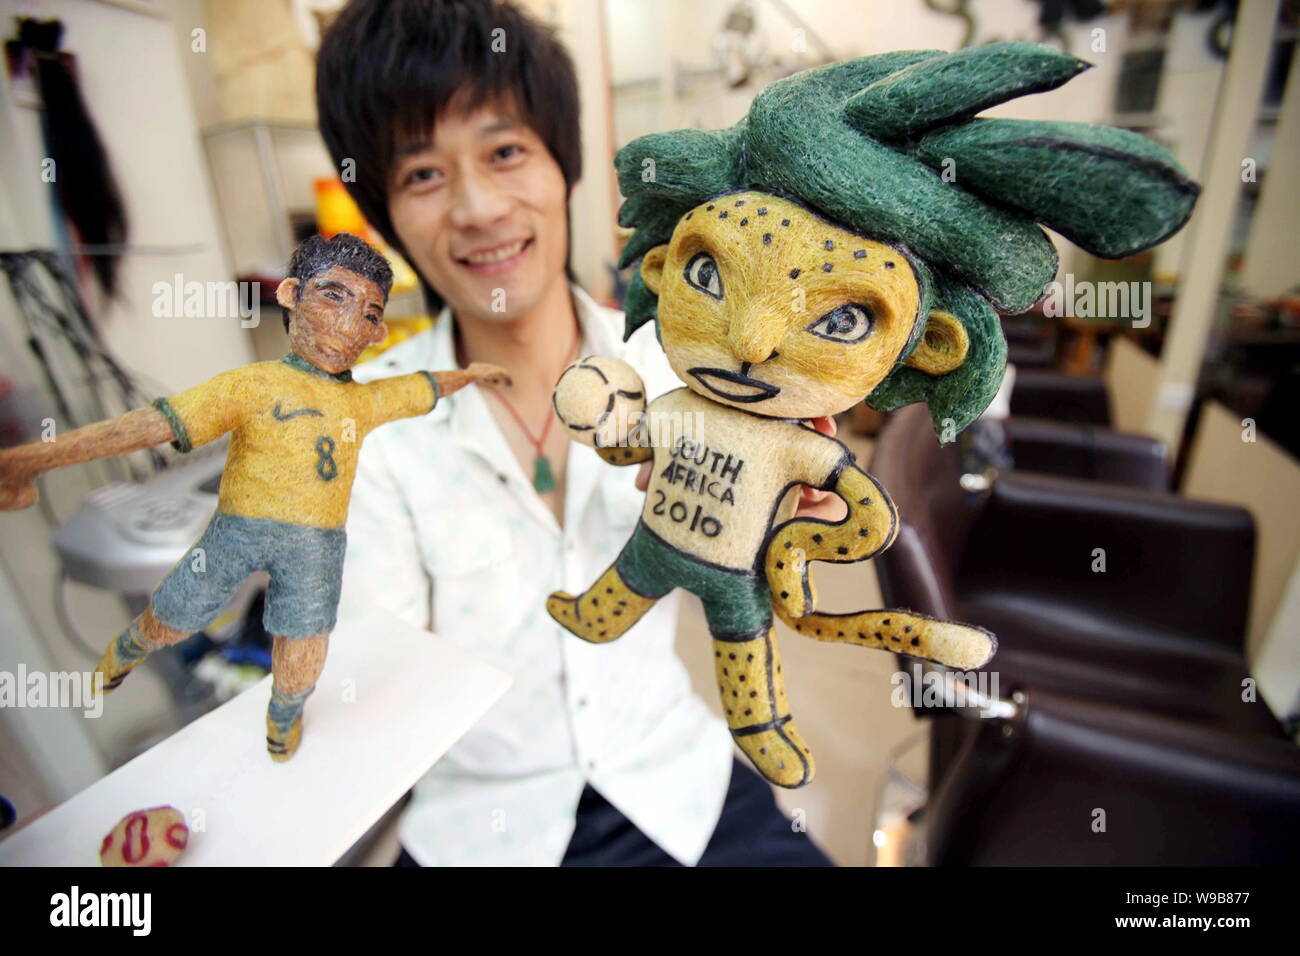 Chinese hairstylist Huang Xin shows his hair-made football player and Zakumi, the official mascot of the World Cup South Africa 2010, in a hair salon Stock Photo